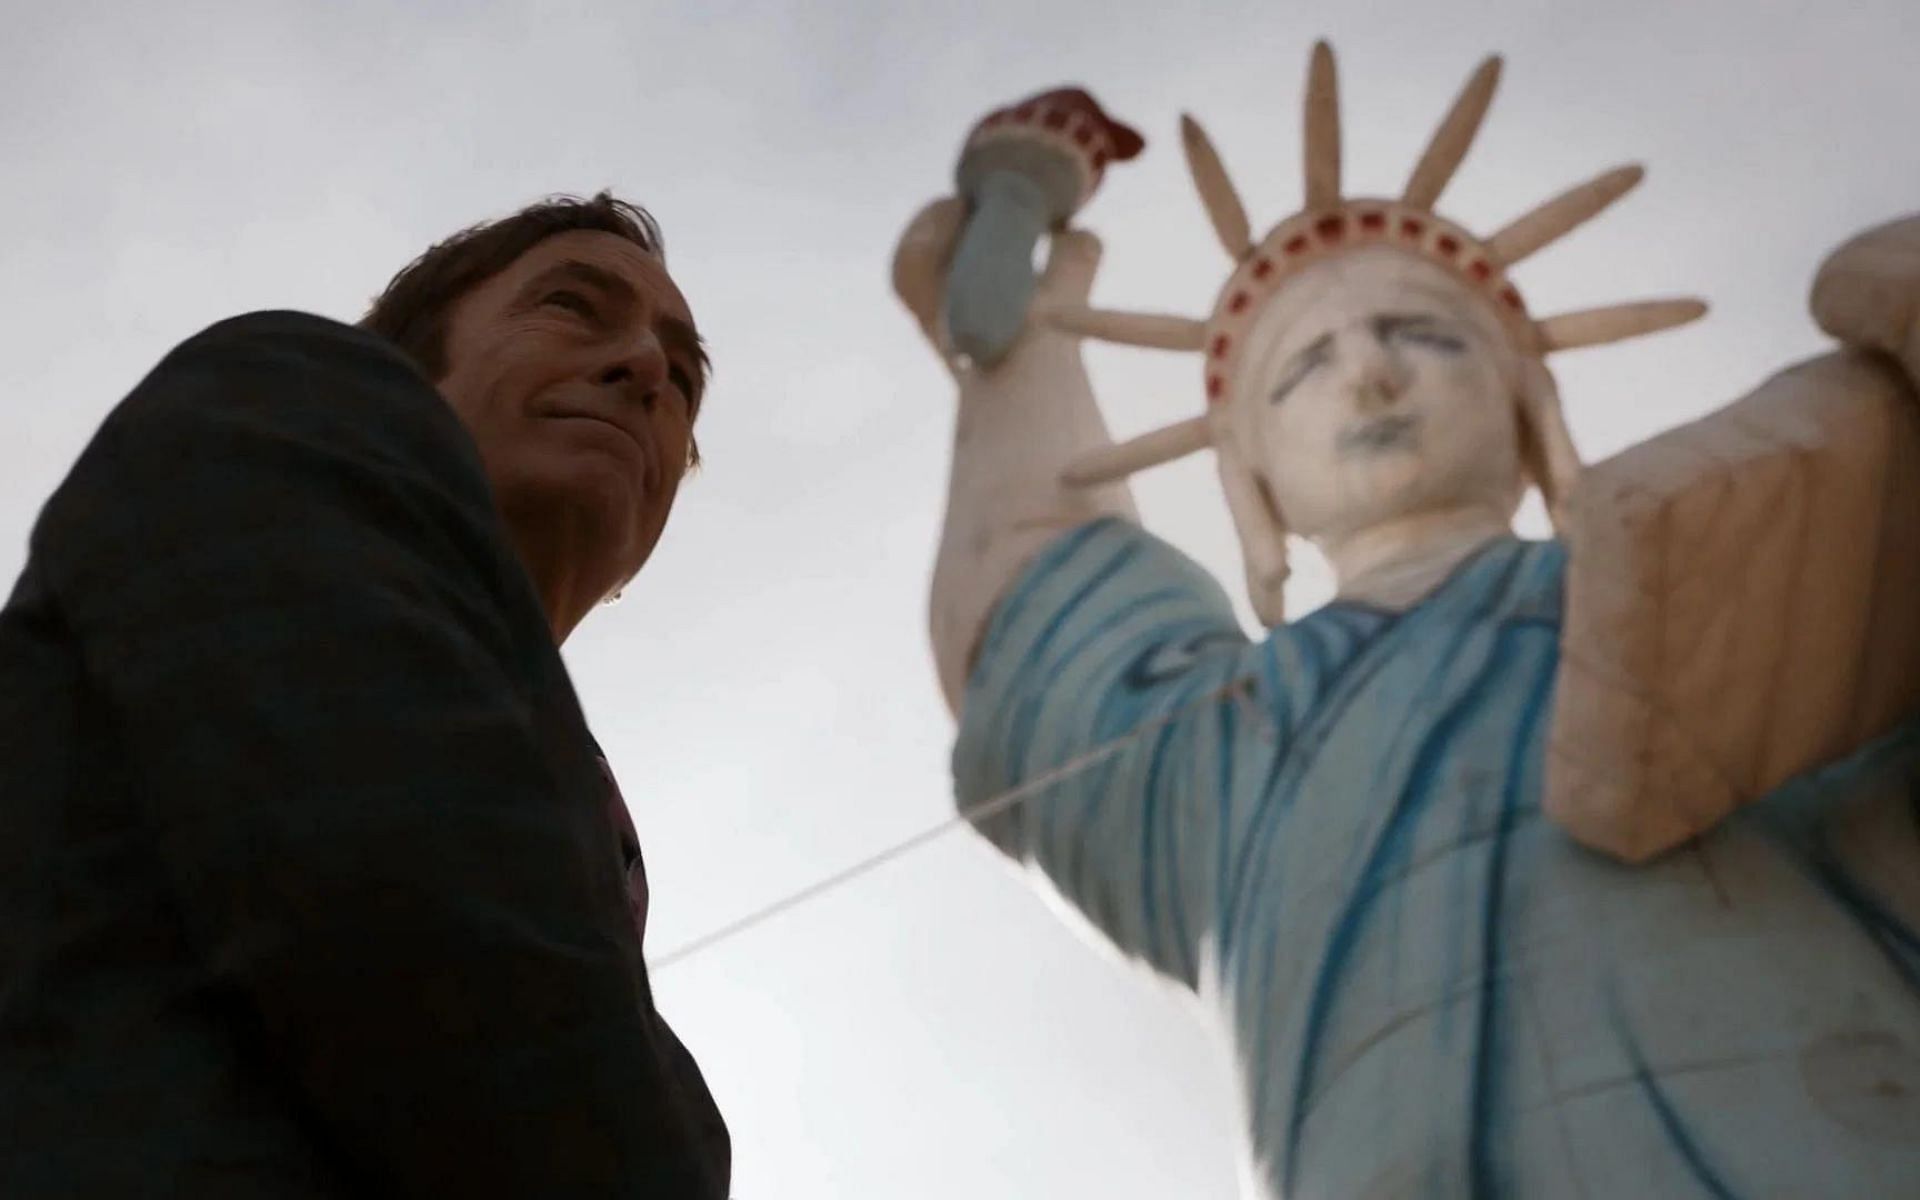 Saul Goodman at the iconic inflatable Statue of Liberty outside the Kettleman&rsquo;s office trailer (Image via IMDb)